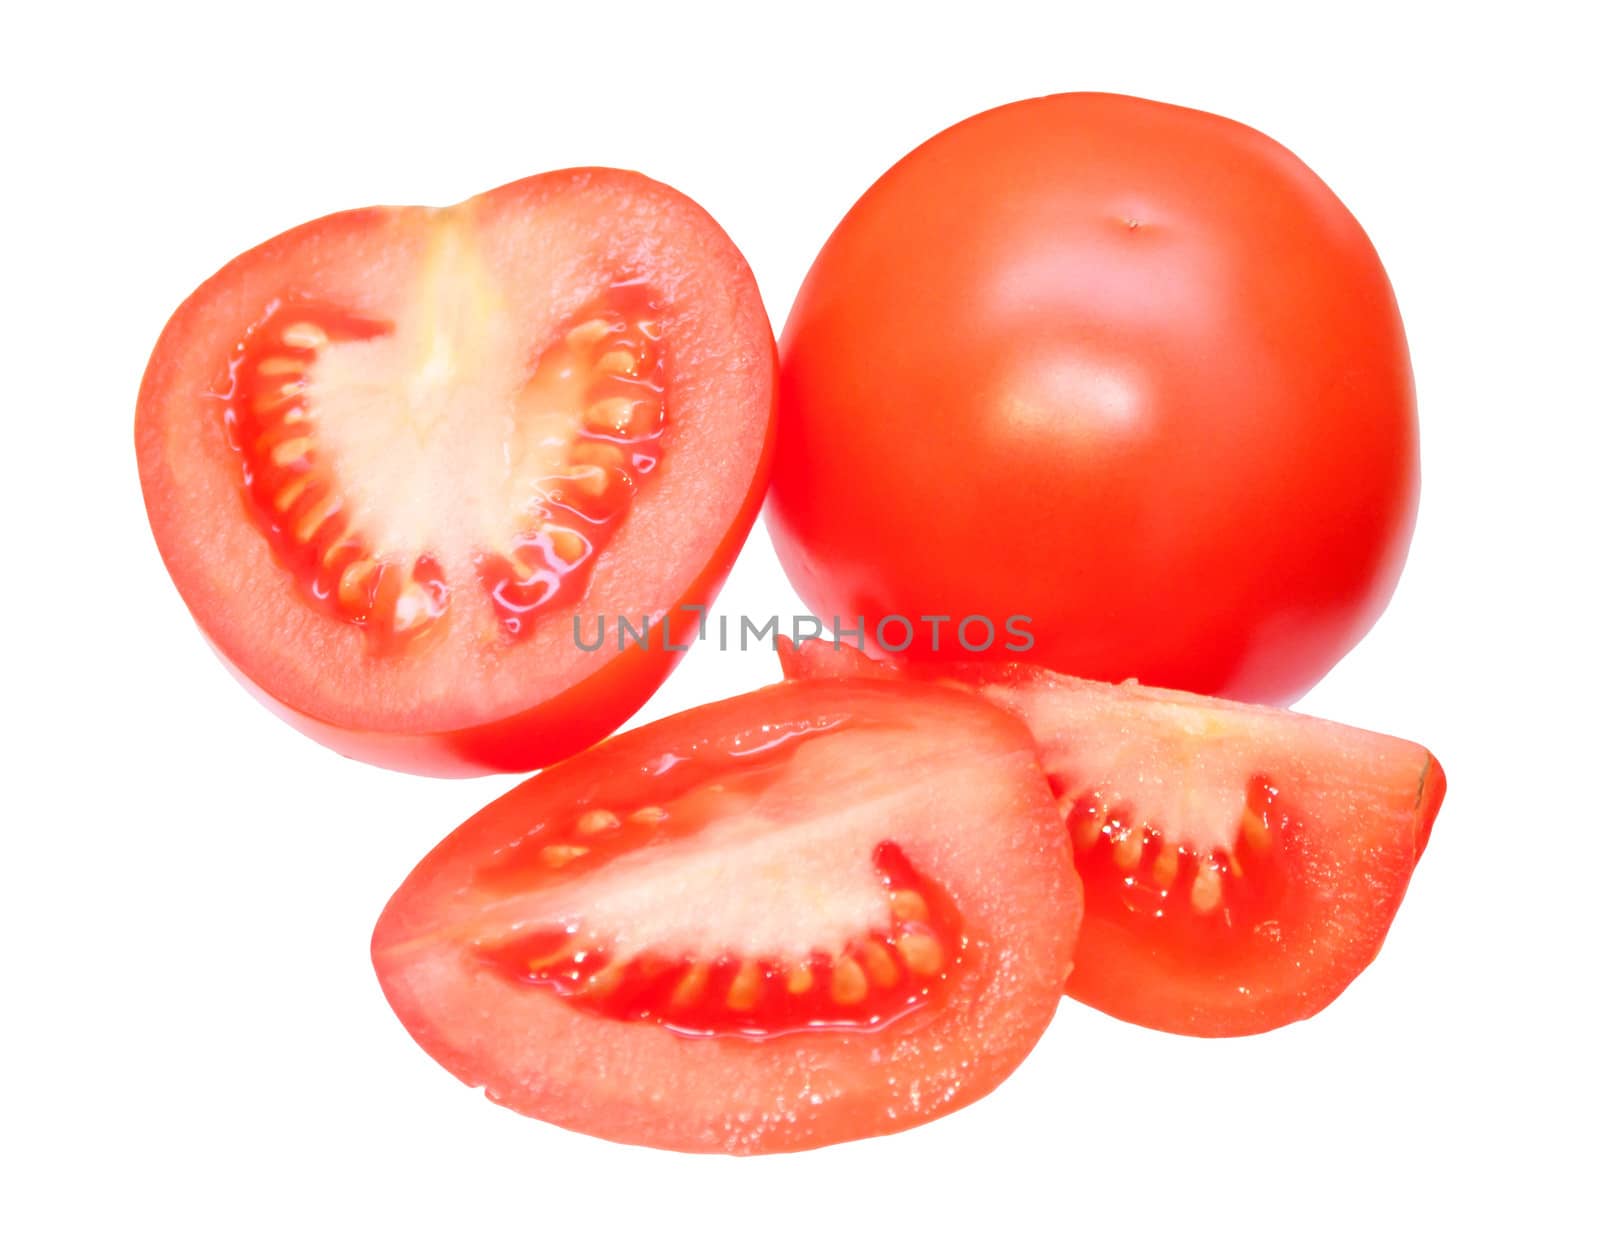 Cut tomatoes, isolated on white background
